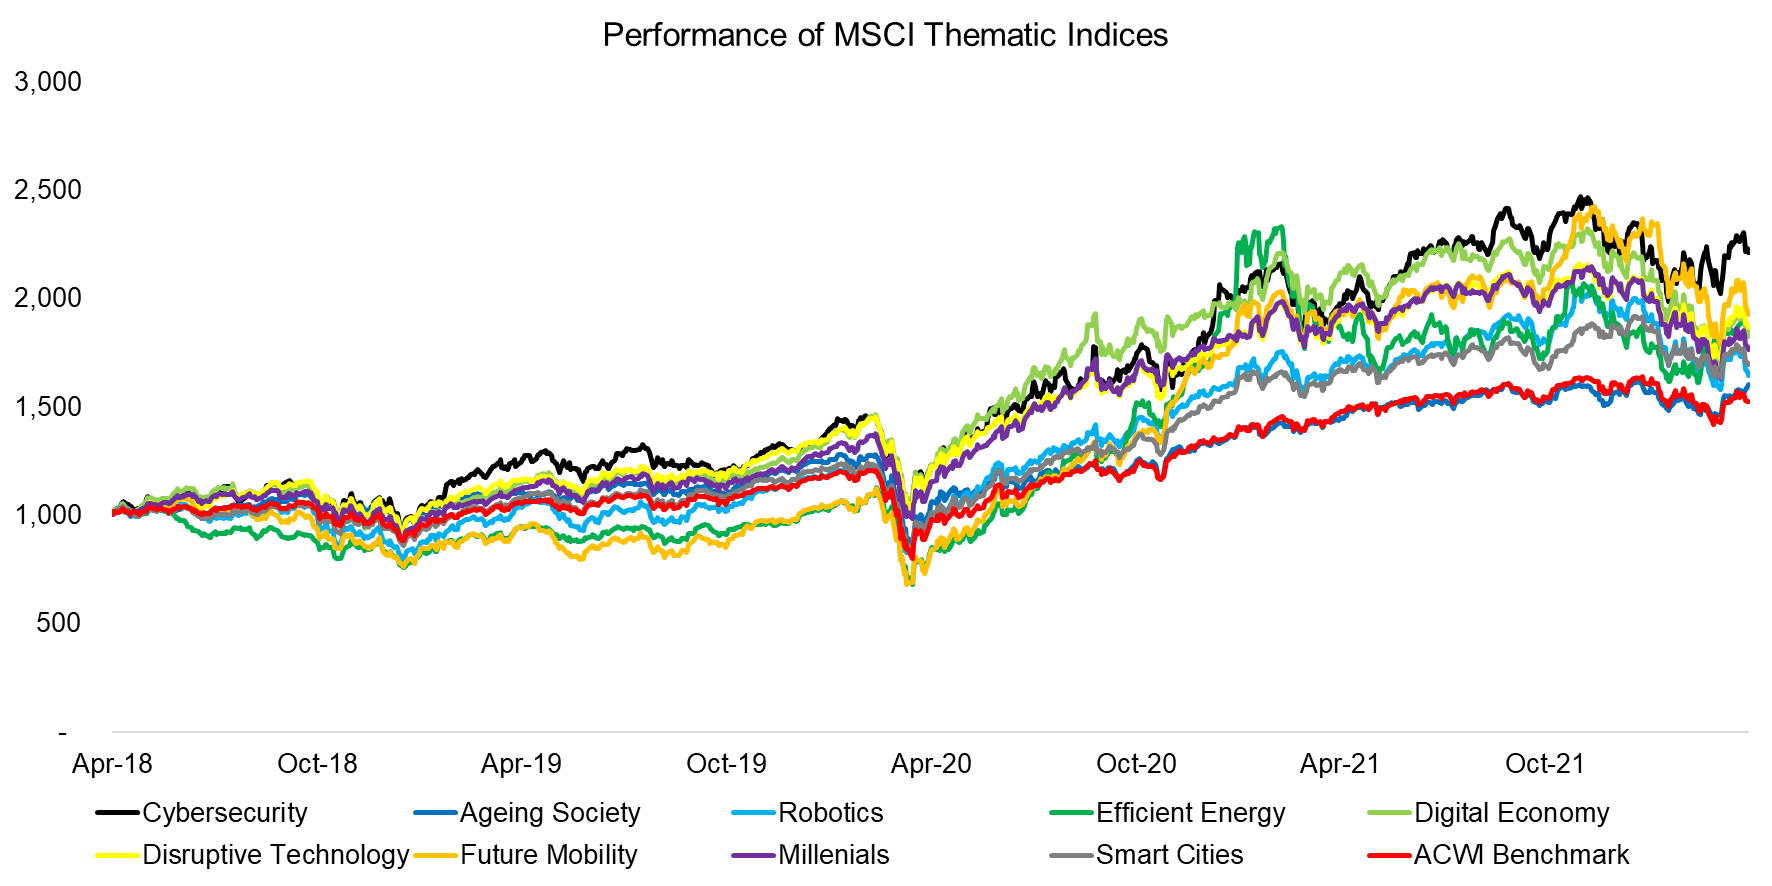 Performance of MSCI Thematic Indices